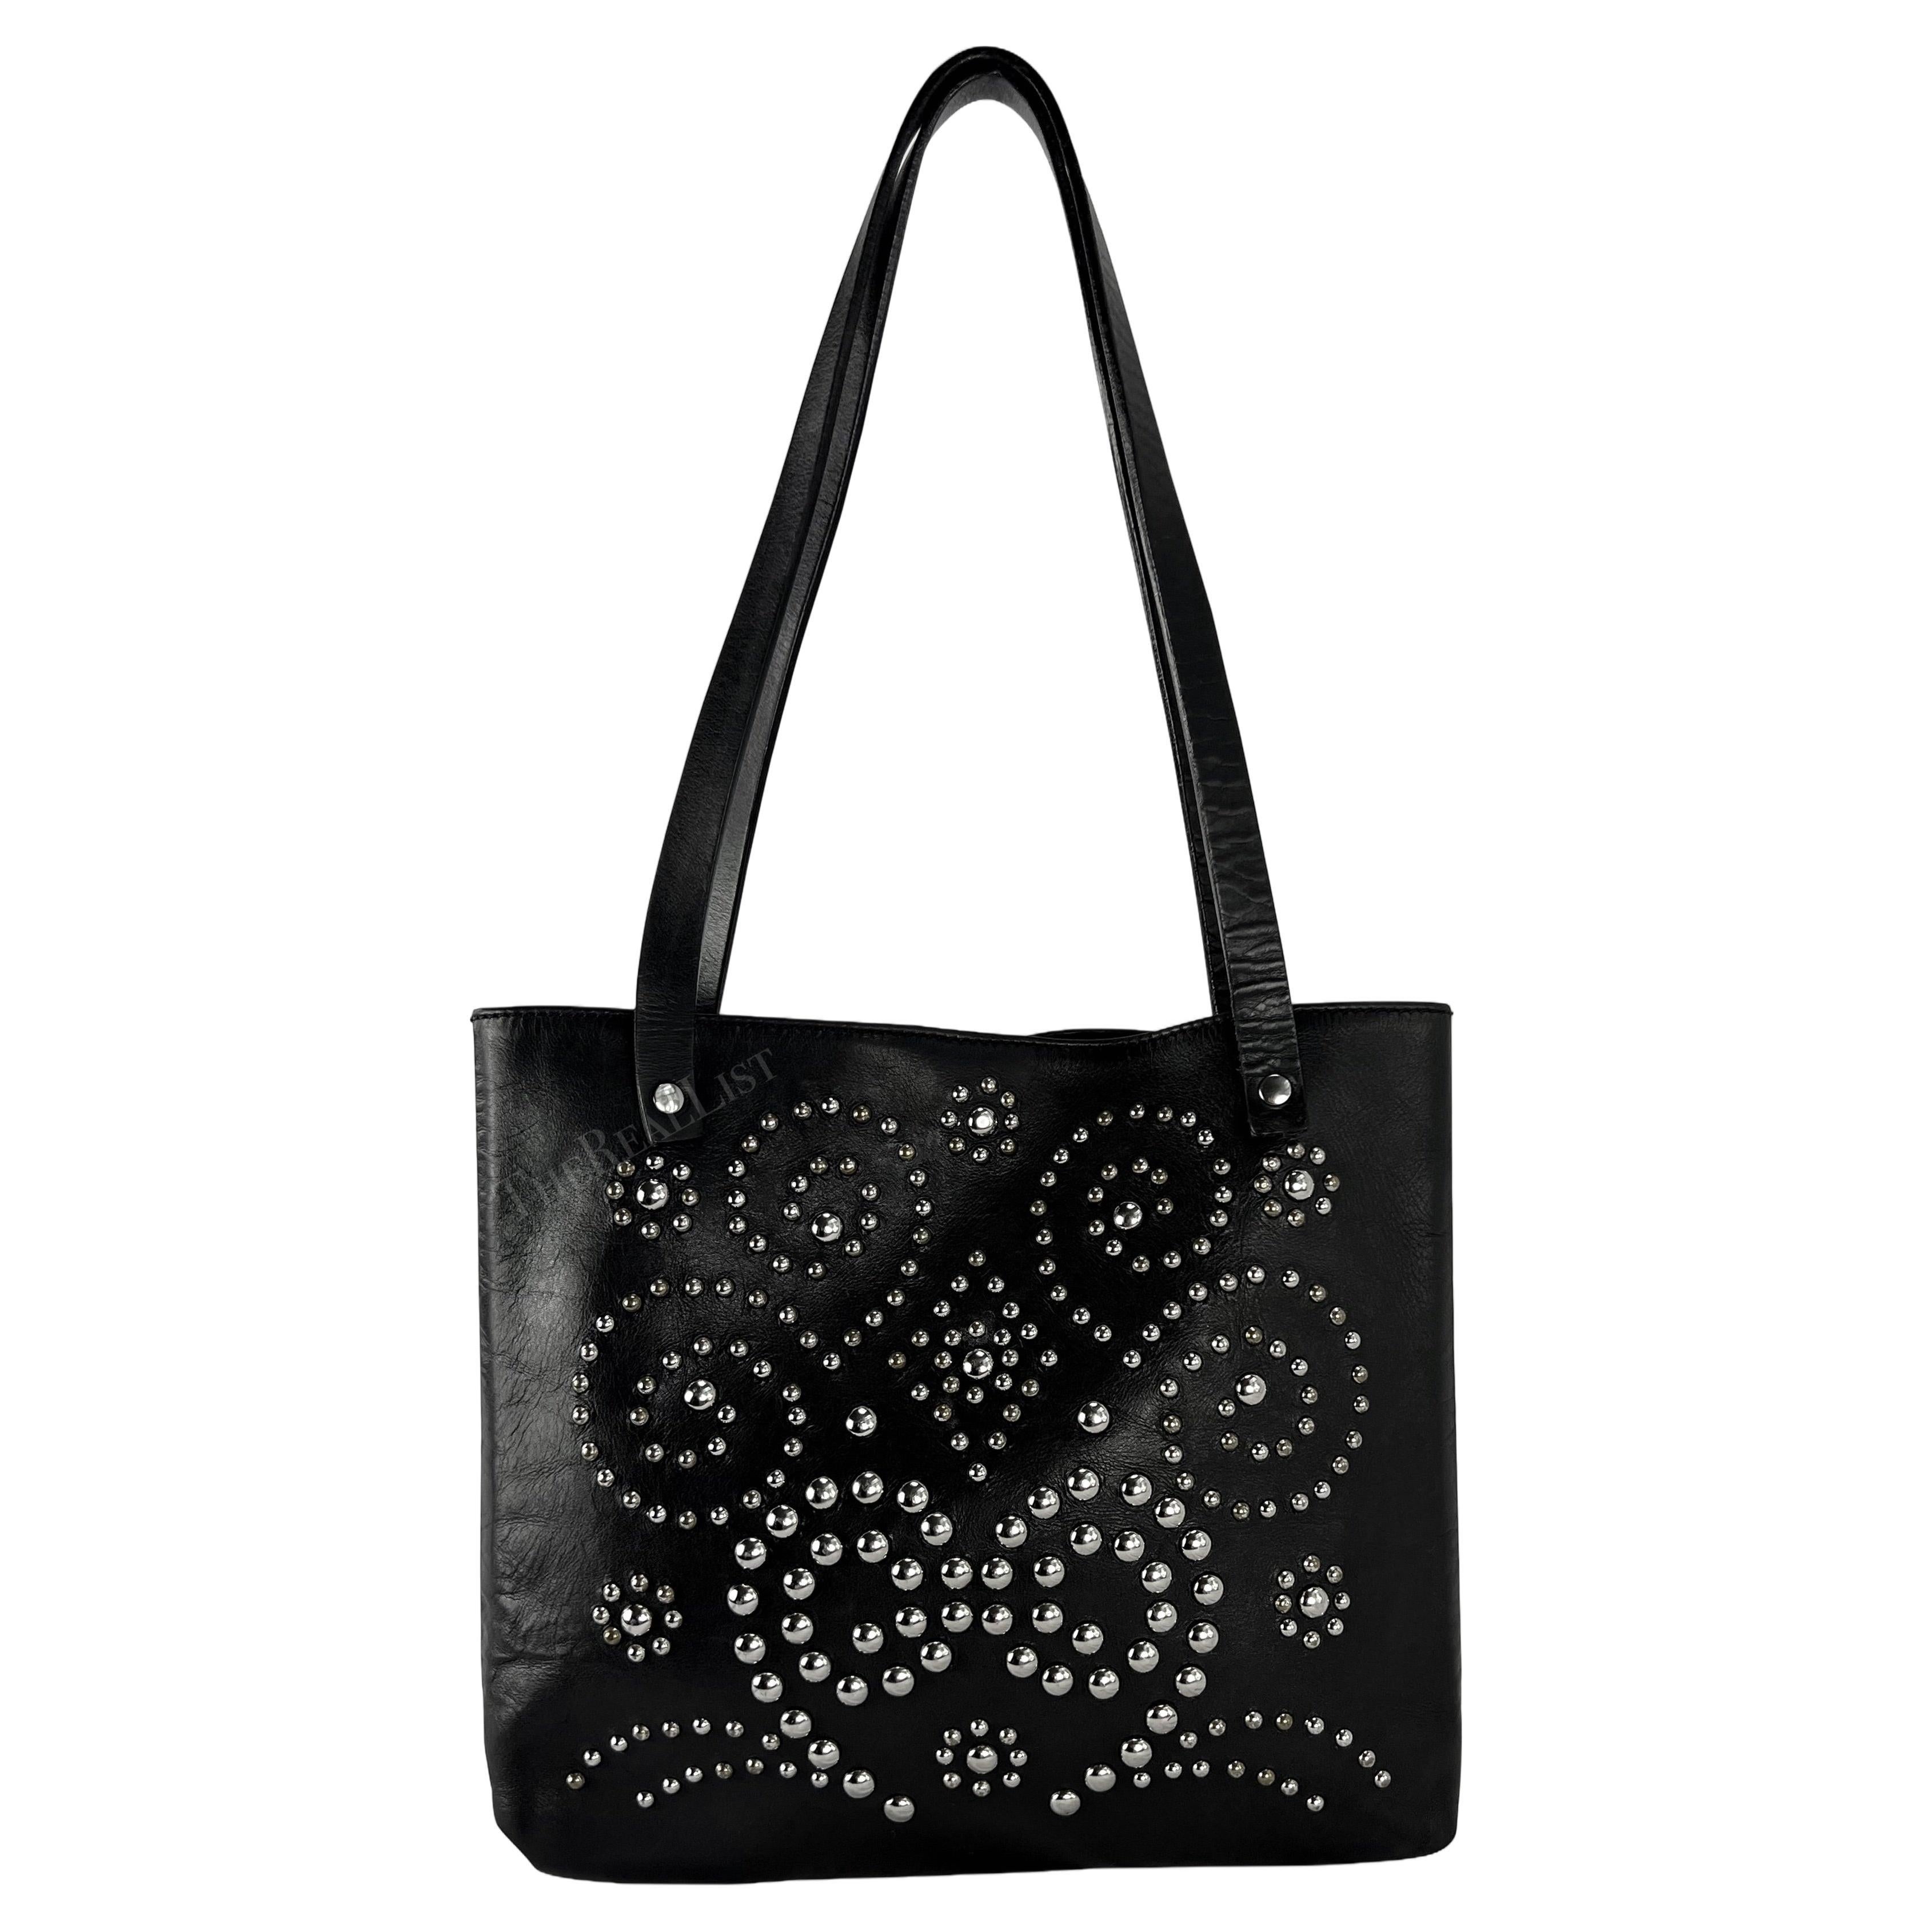 Late 1990s Dolce & Gabbana Black Leather Studded Small Shoulder Tote Bag For Sale